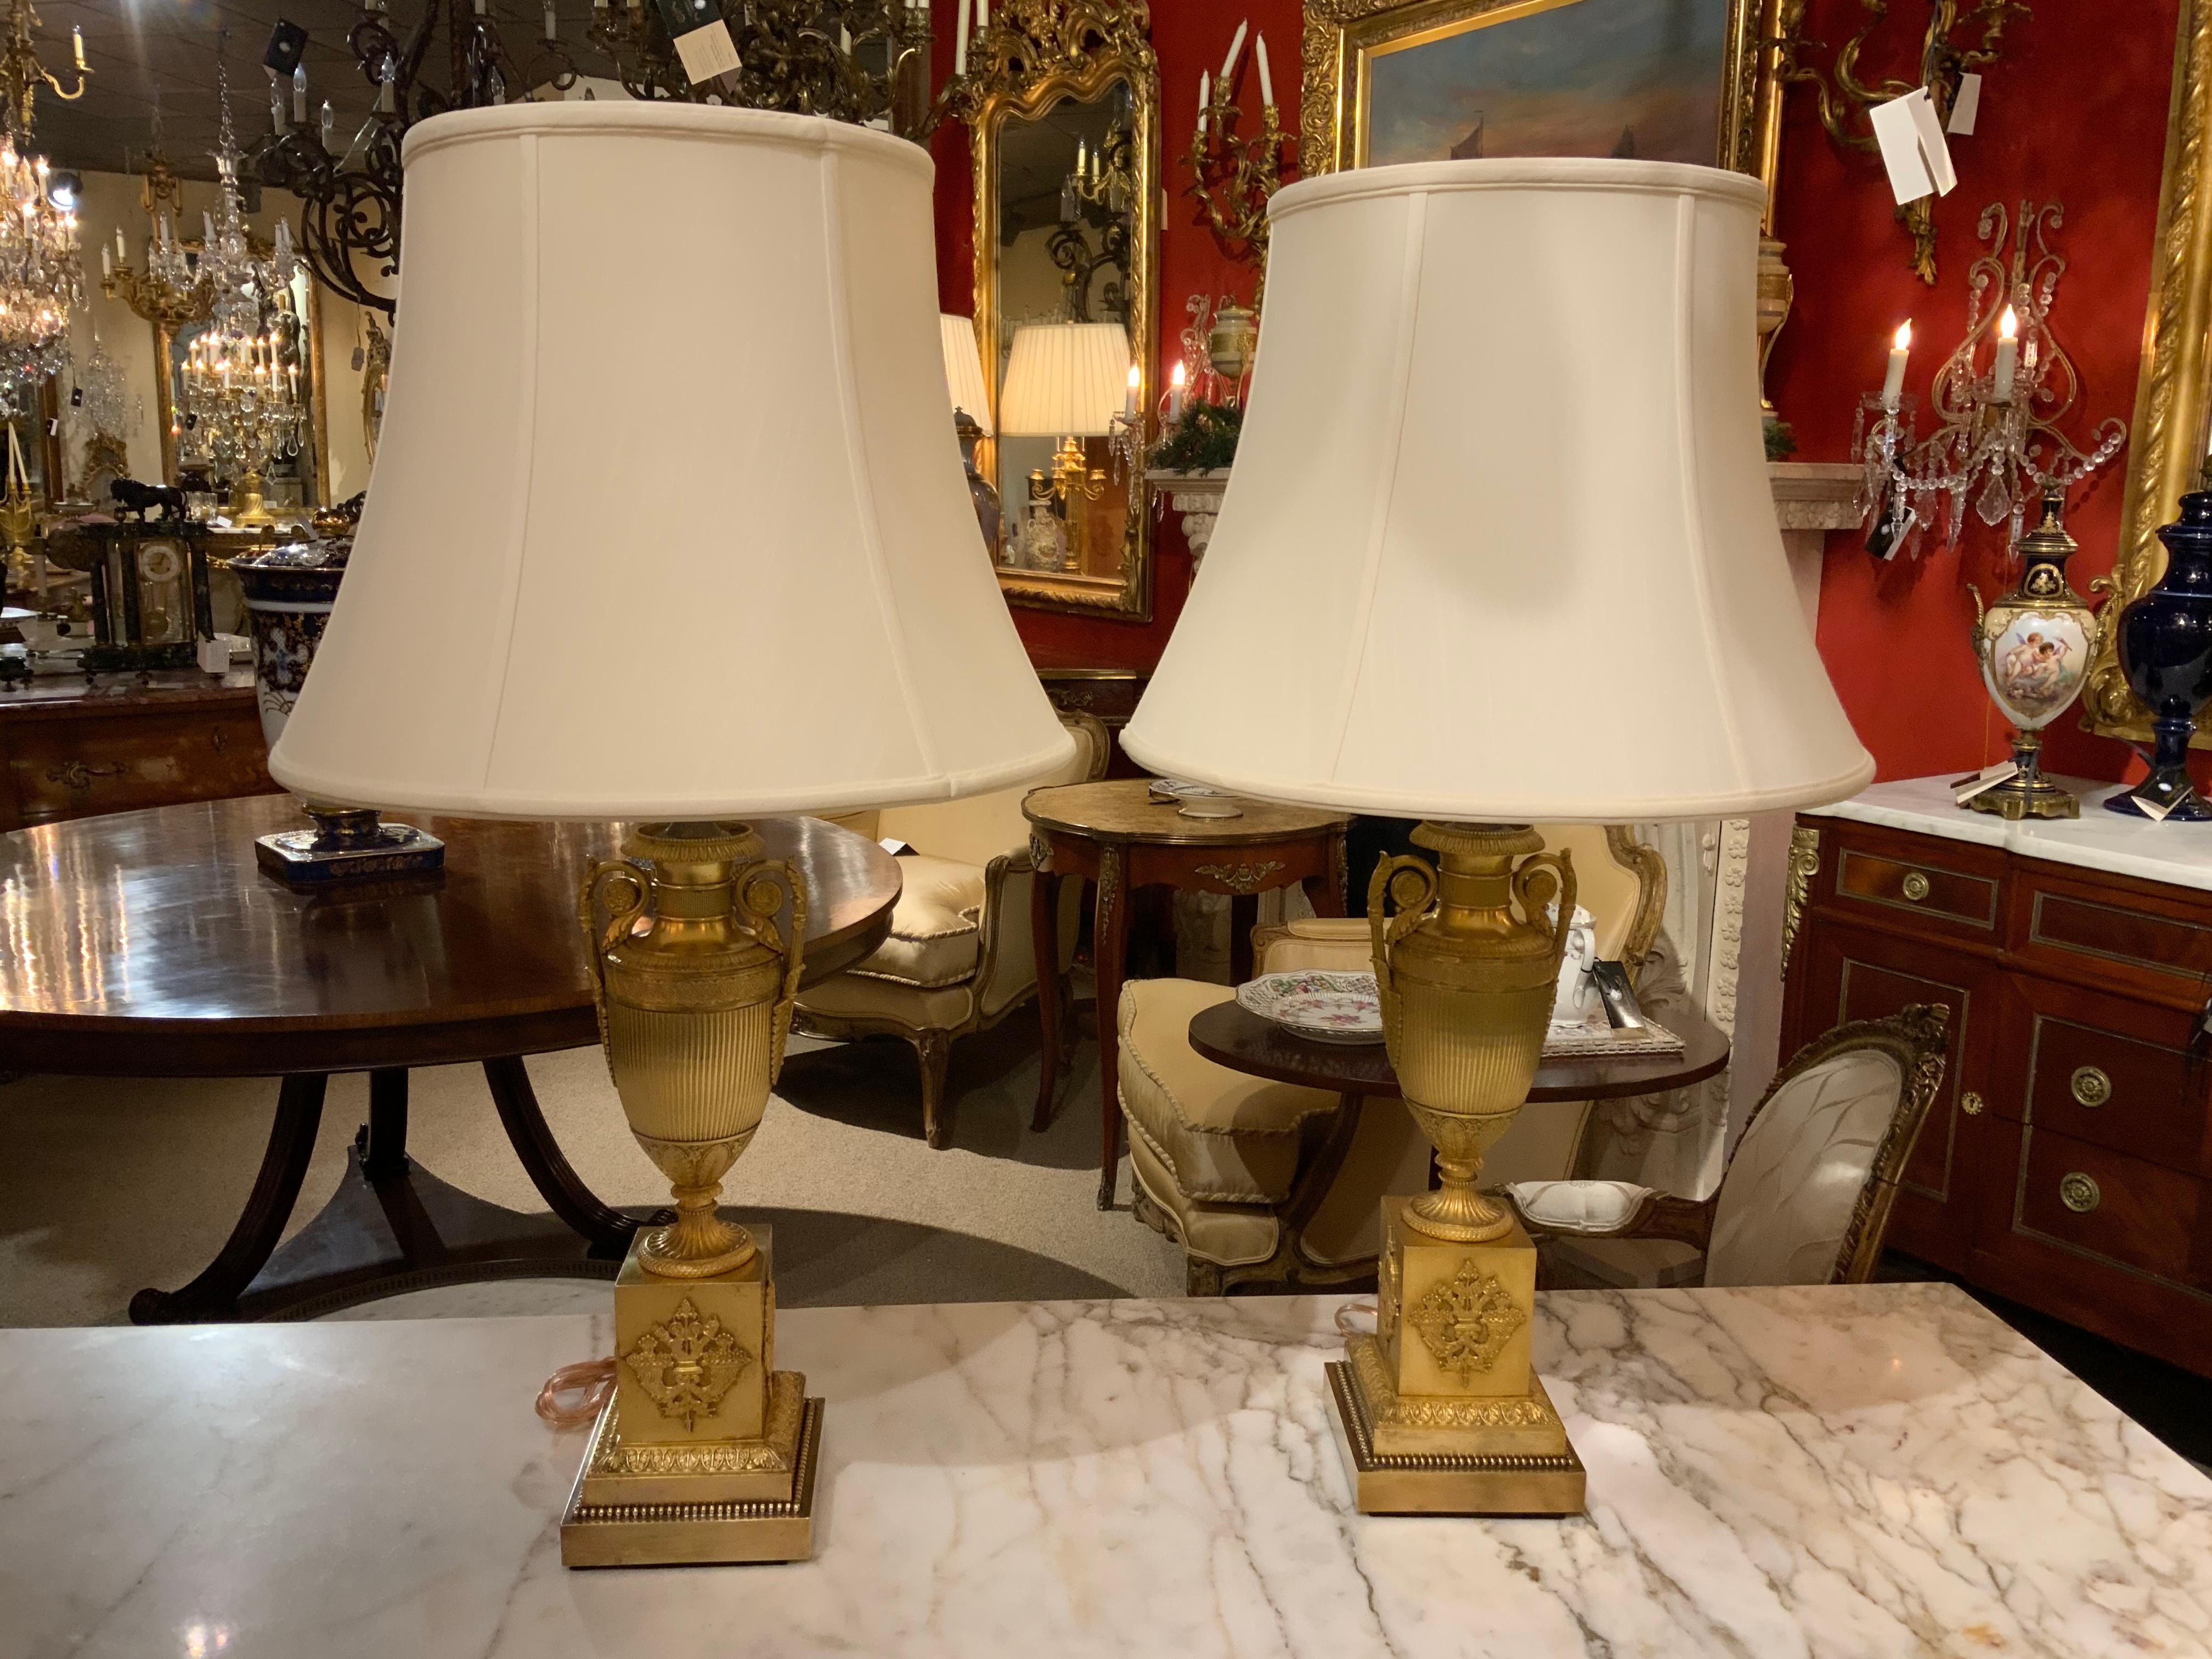 Exceptional gilding on this pair of urns that have been converted into lamps.
The urns having a curved handle on either side of the baluster form urn.
The urn has a reeded design and is set on a square base with a design
Of a torch and quiver